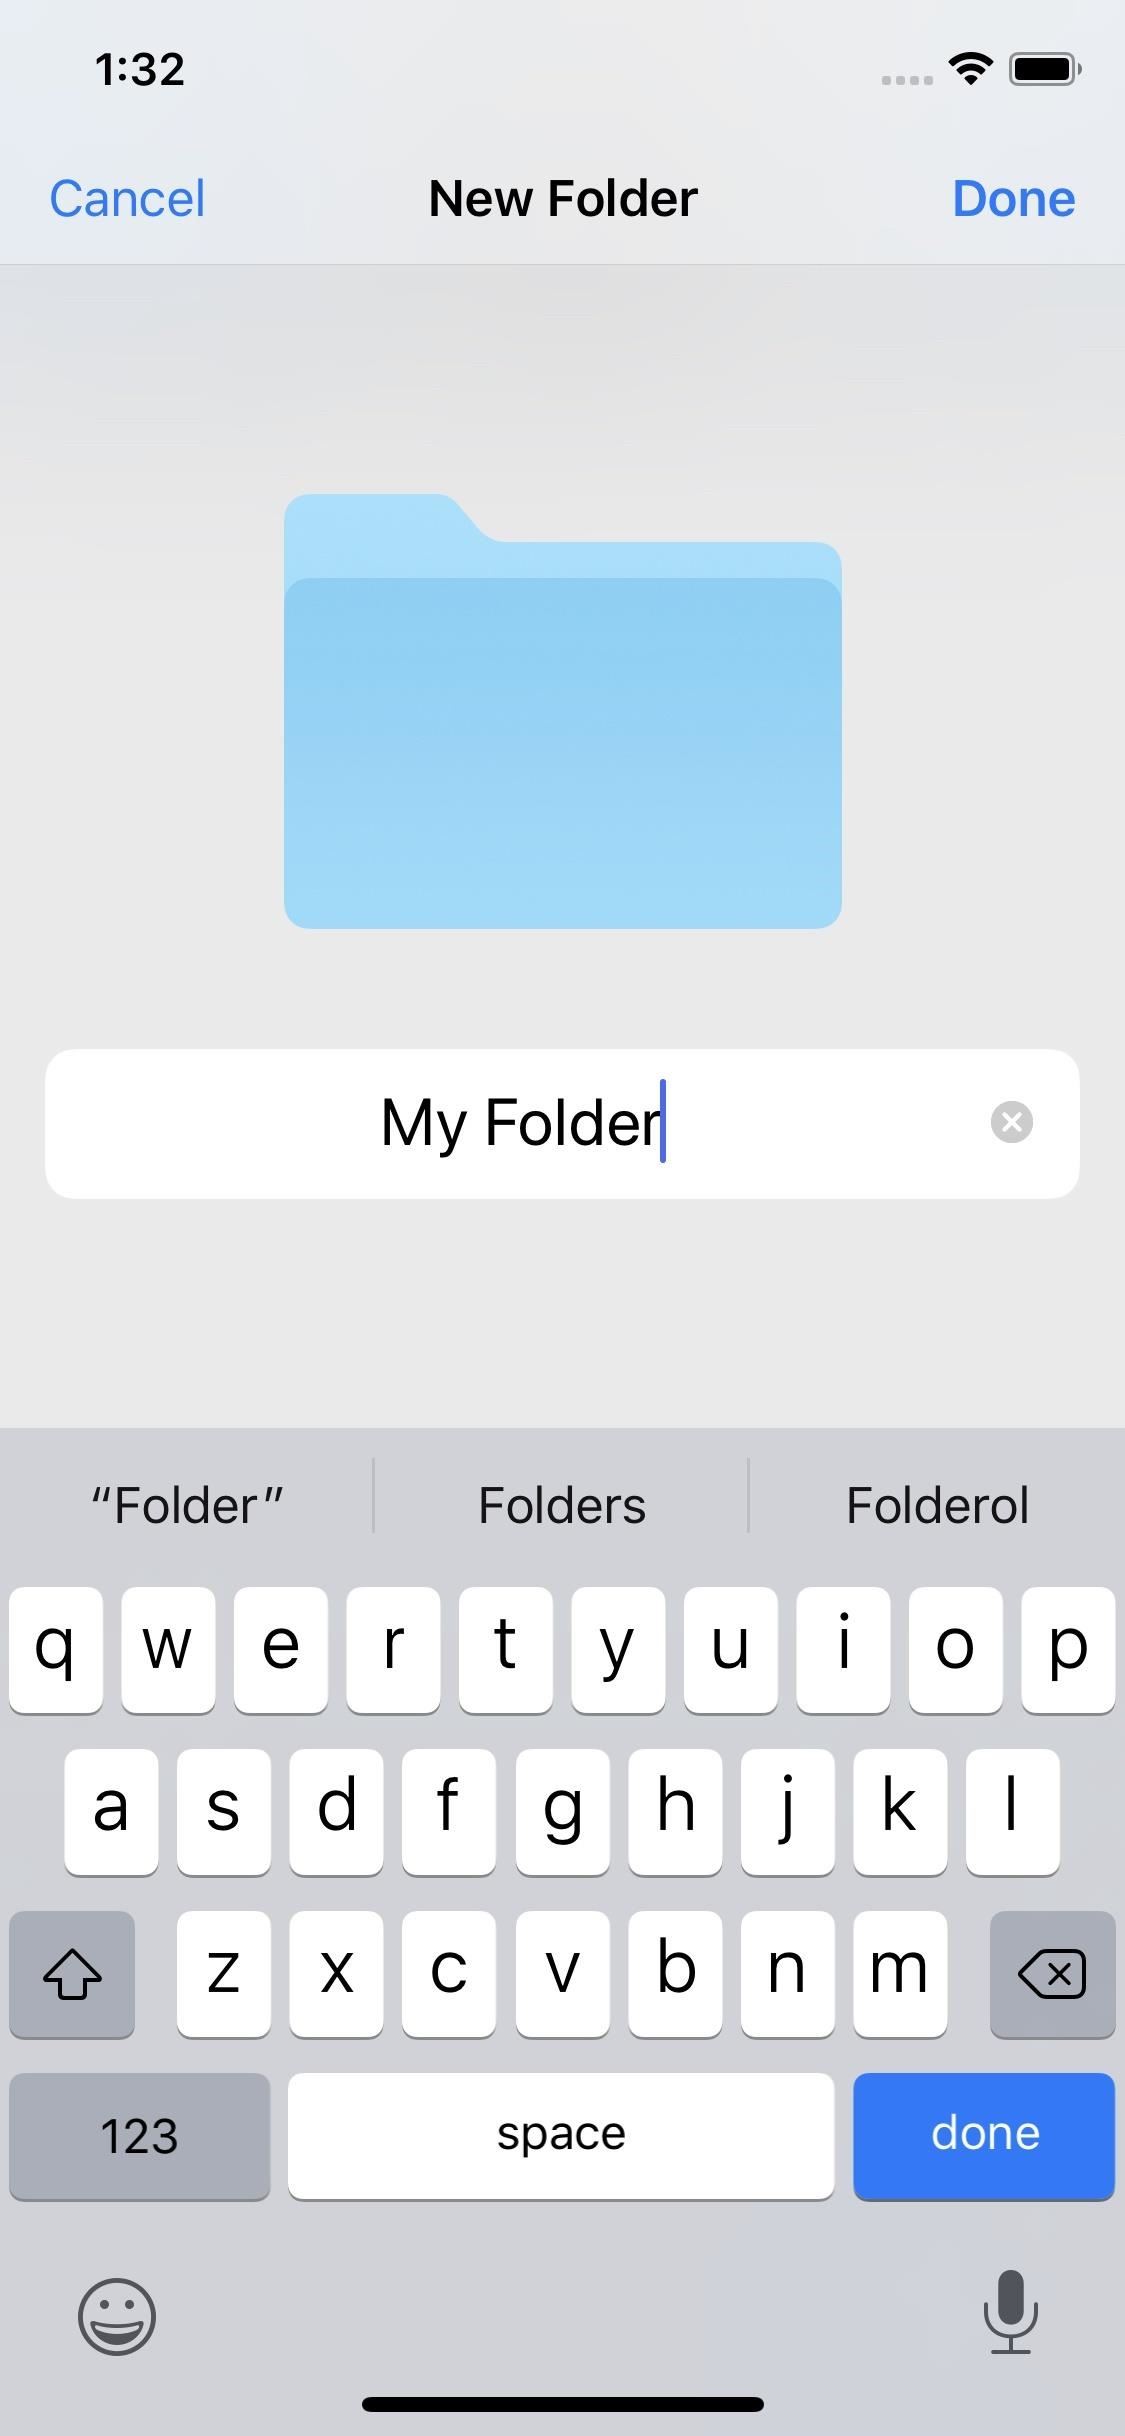 Apple Finally Fixed the Biggest Problem with the iPhone's Files App